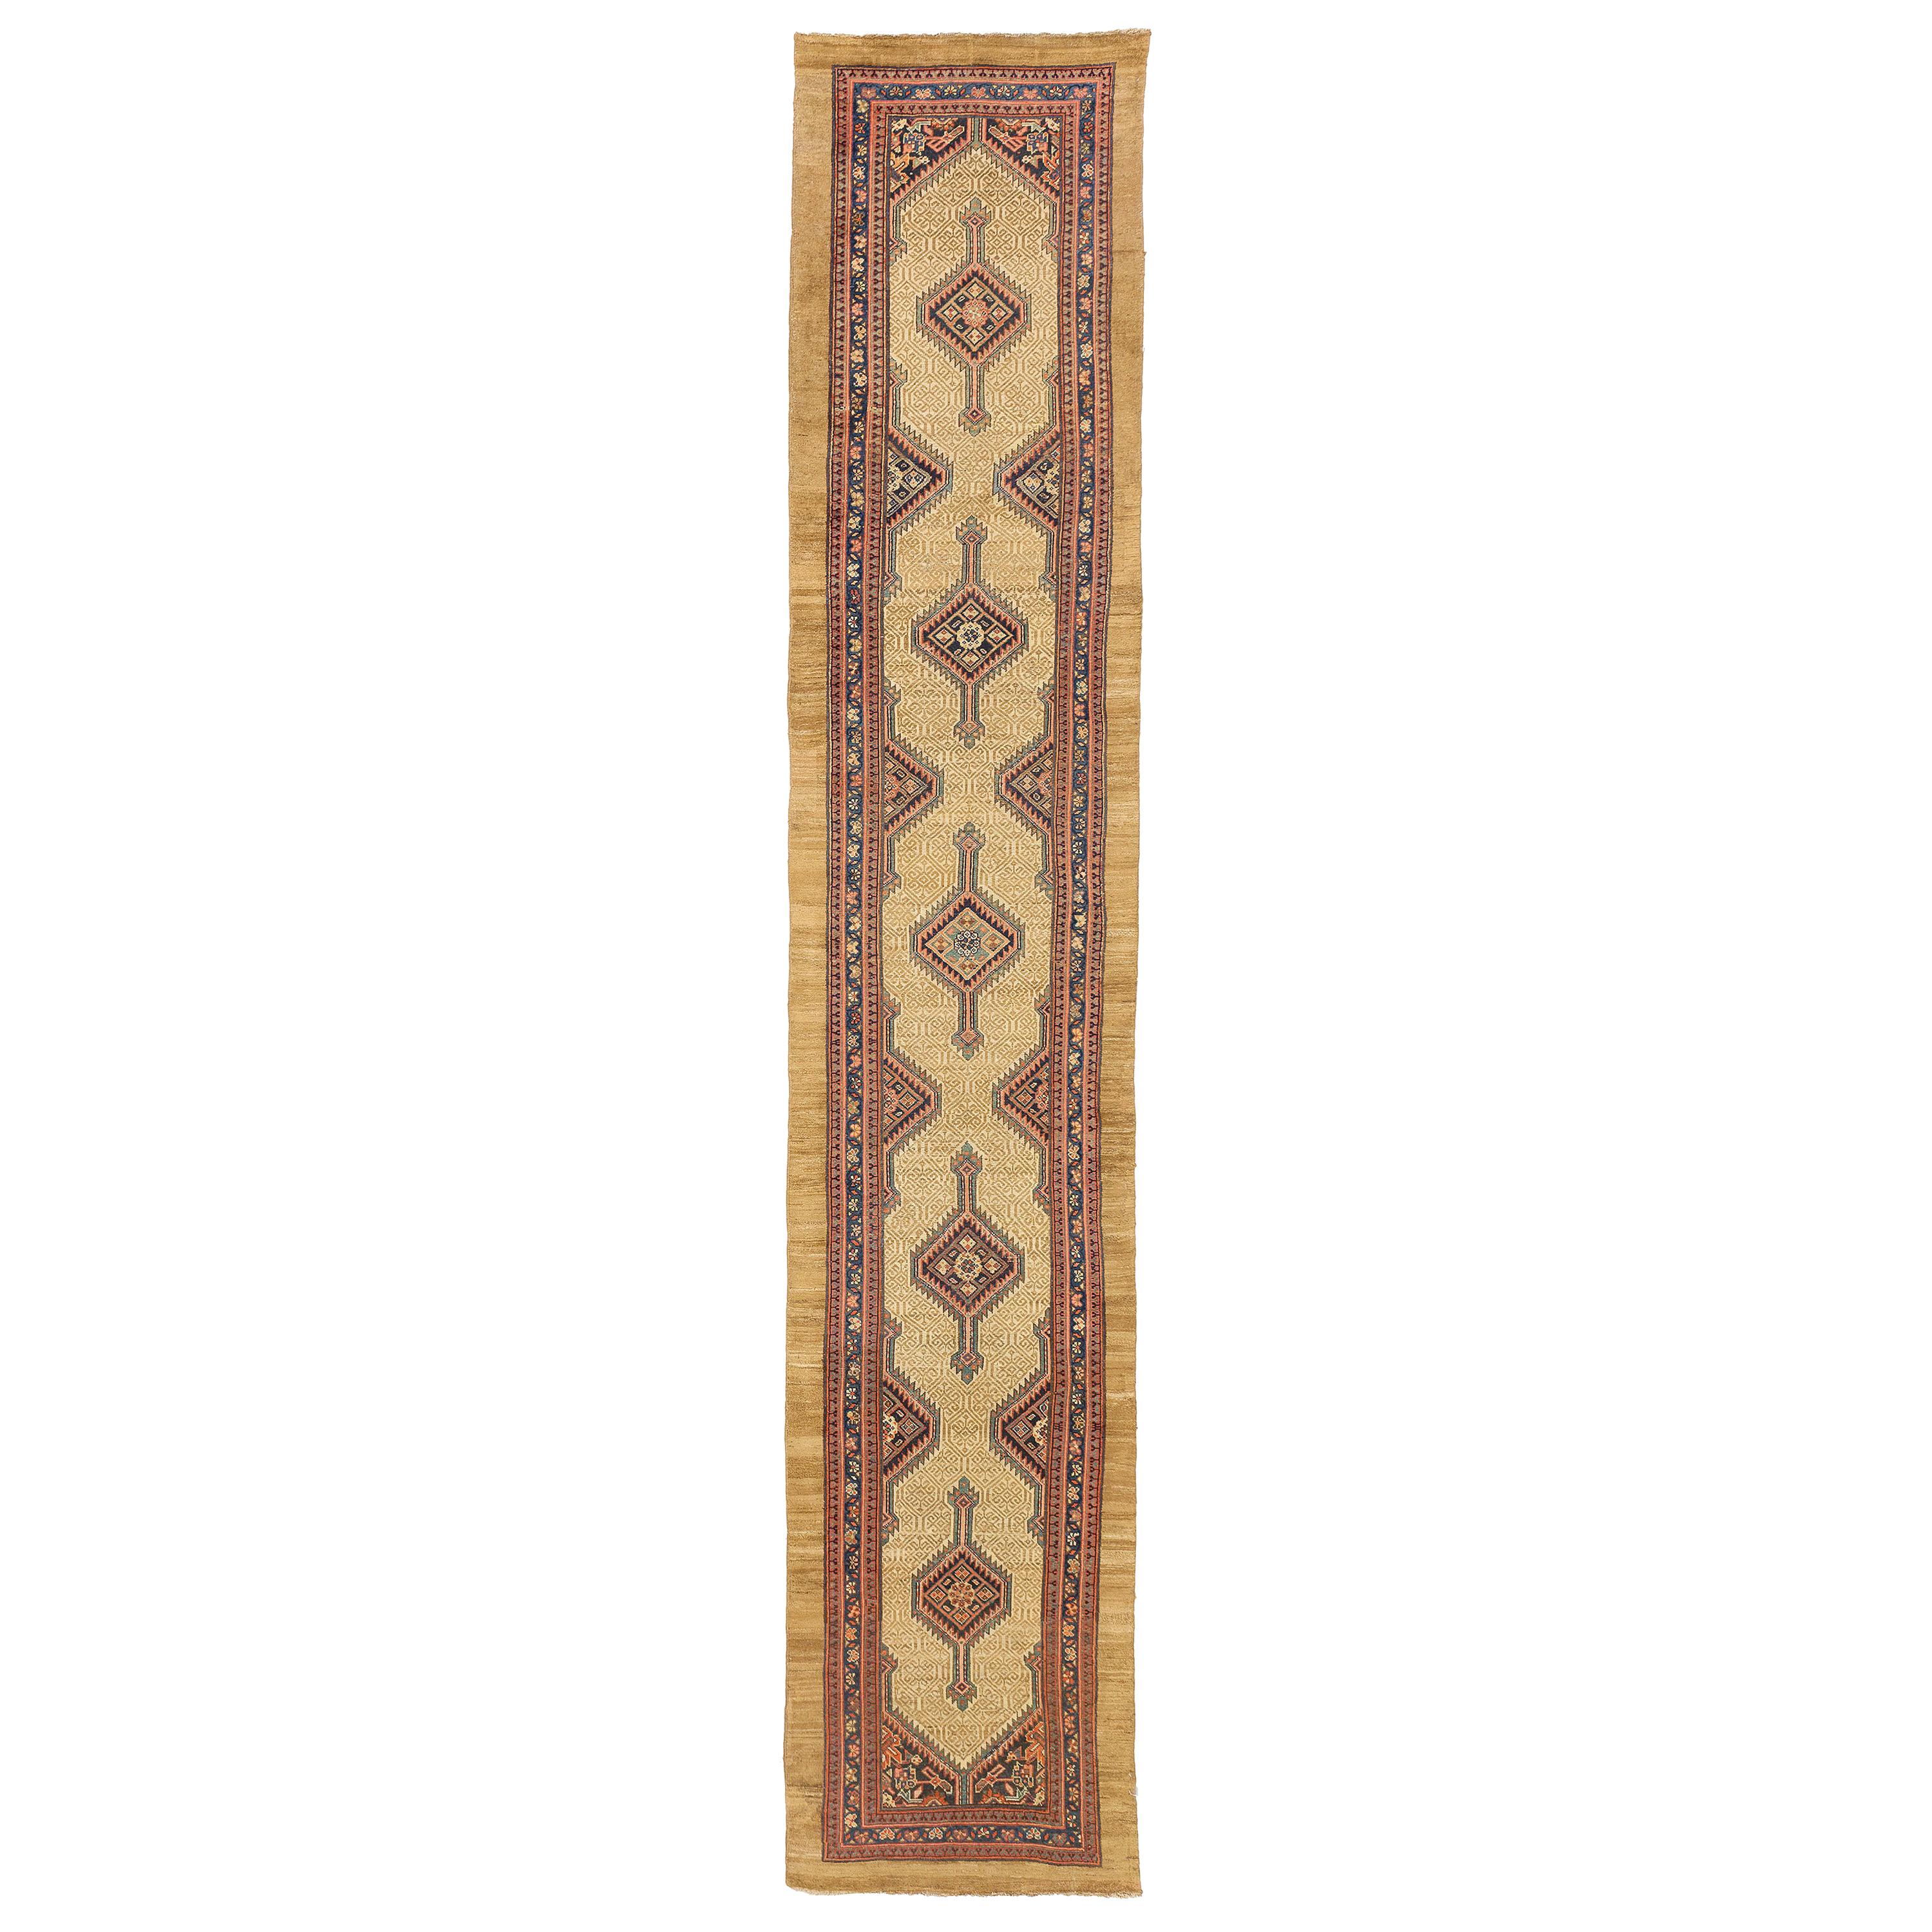 1890 Antique Persian Sarab Runner Rug with Brown and Beige Geometric Details For Sale